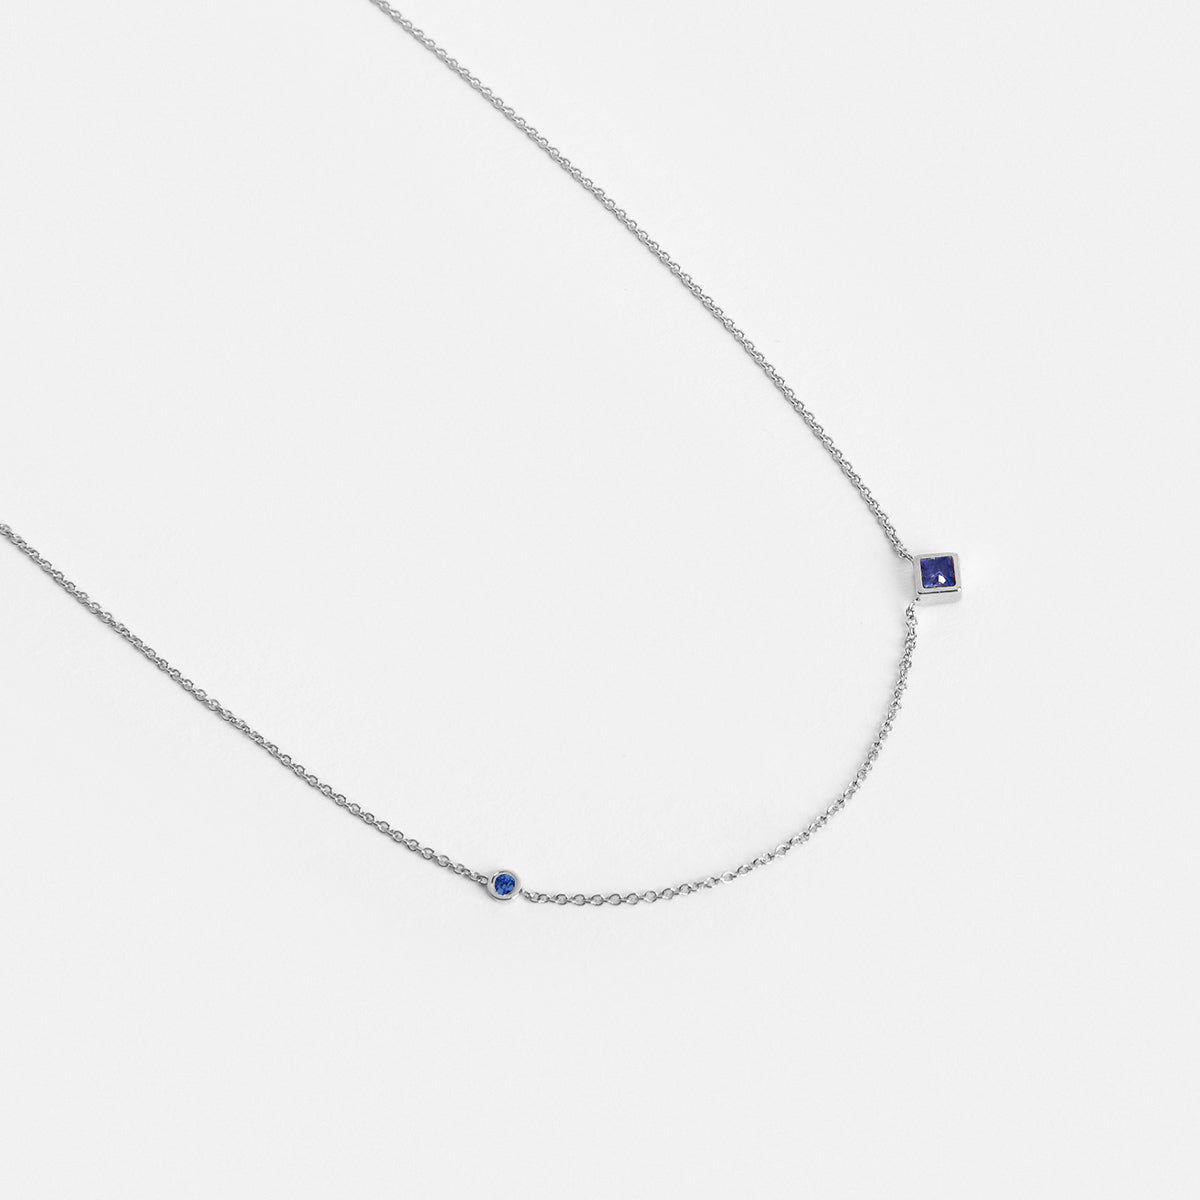 Isu Unique Necklace in 14k White Gold set with Sapphire By SHW Fine Jewelry NYC